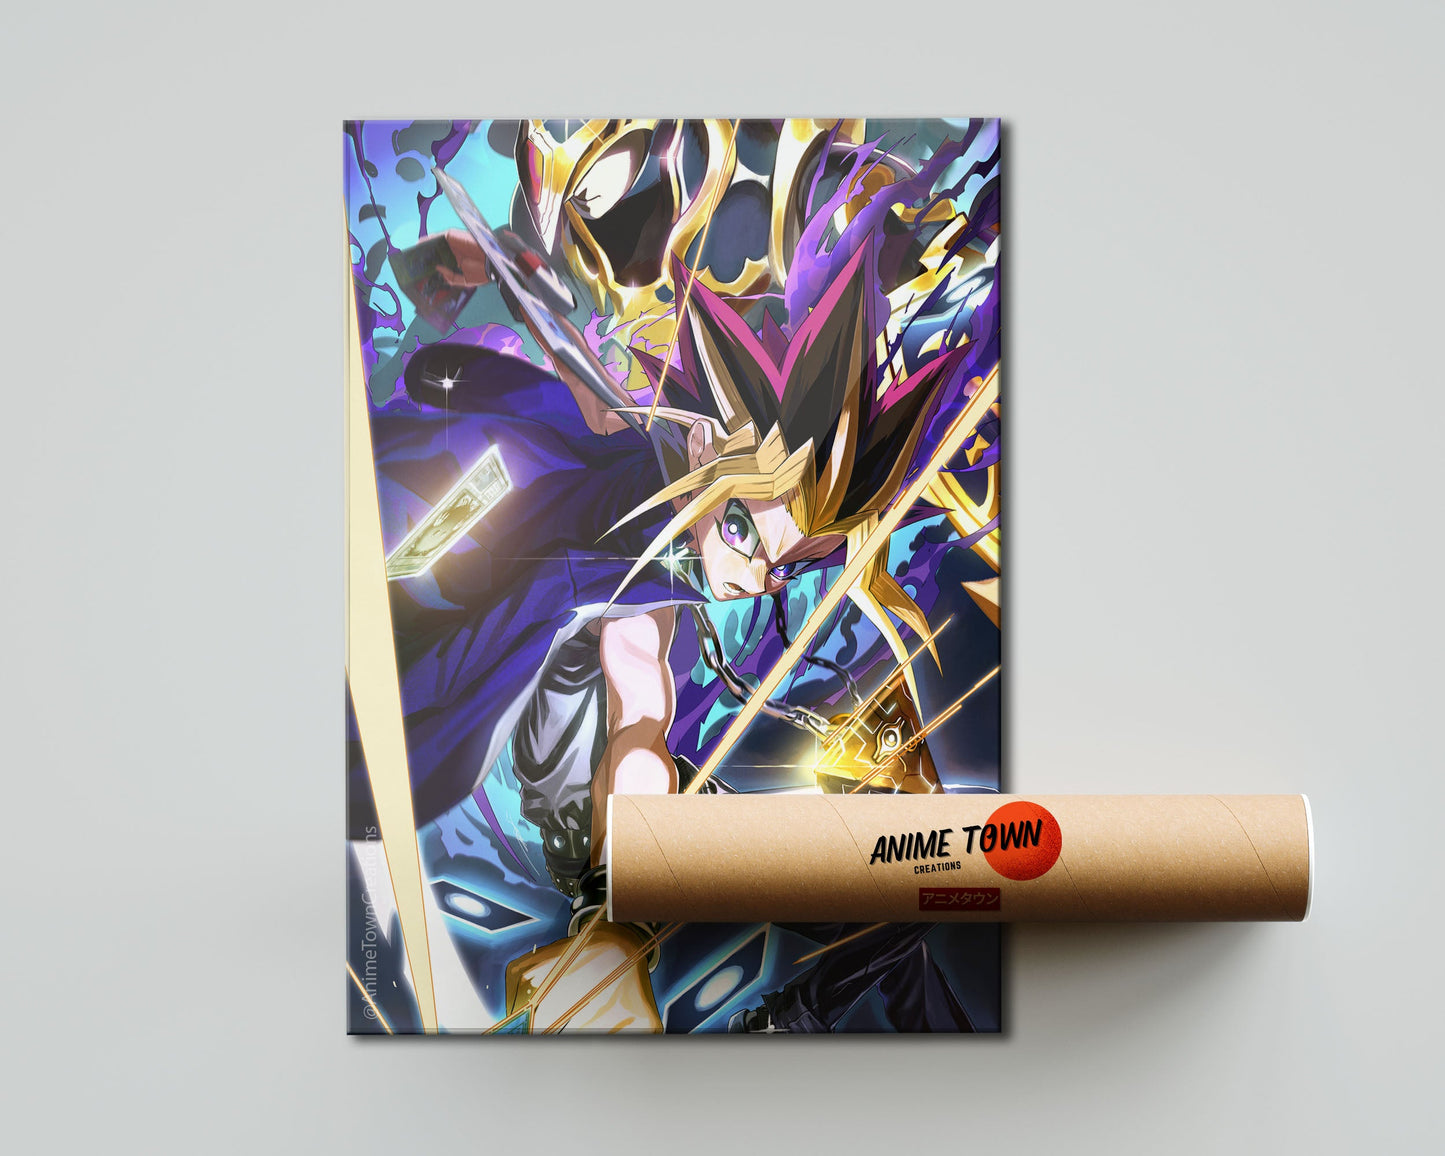 Anime Town Creations Poster Yugioh Yugi & Black Luster Soldier 5" x 7" Home Goods - Anime Yu-Gi-Oh Poster